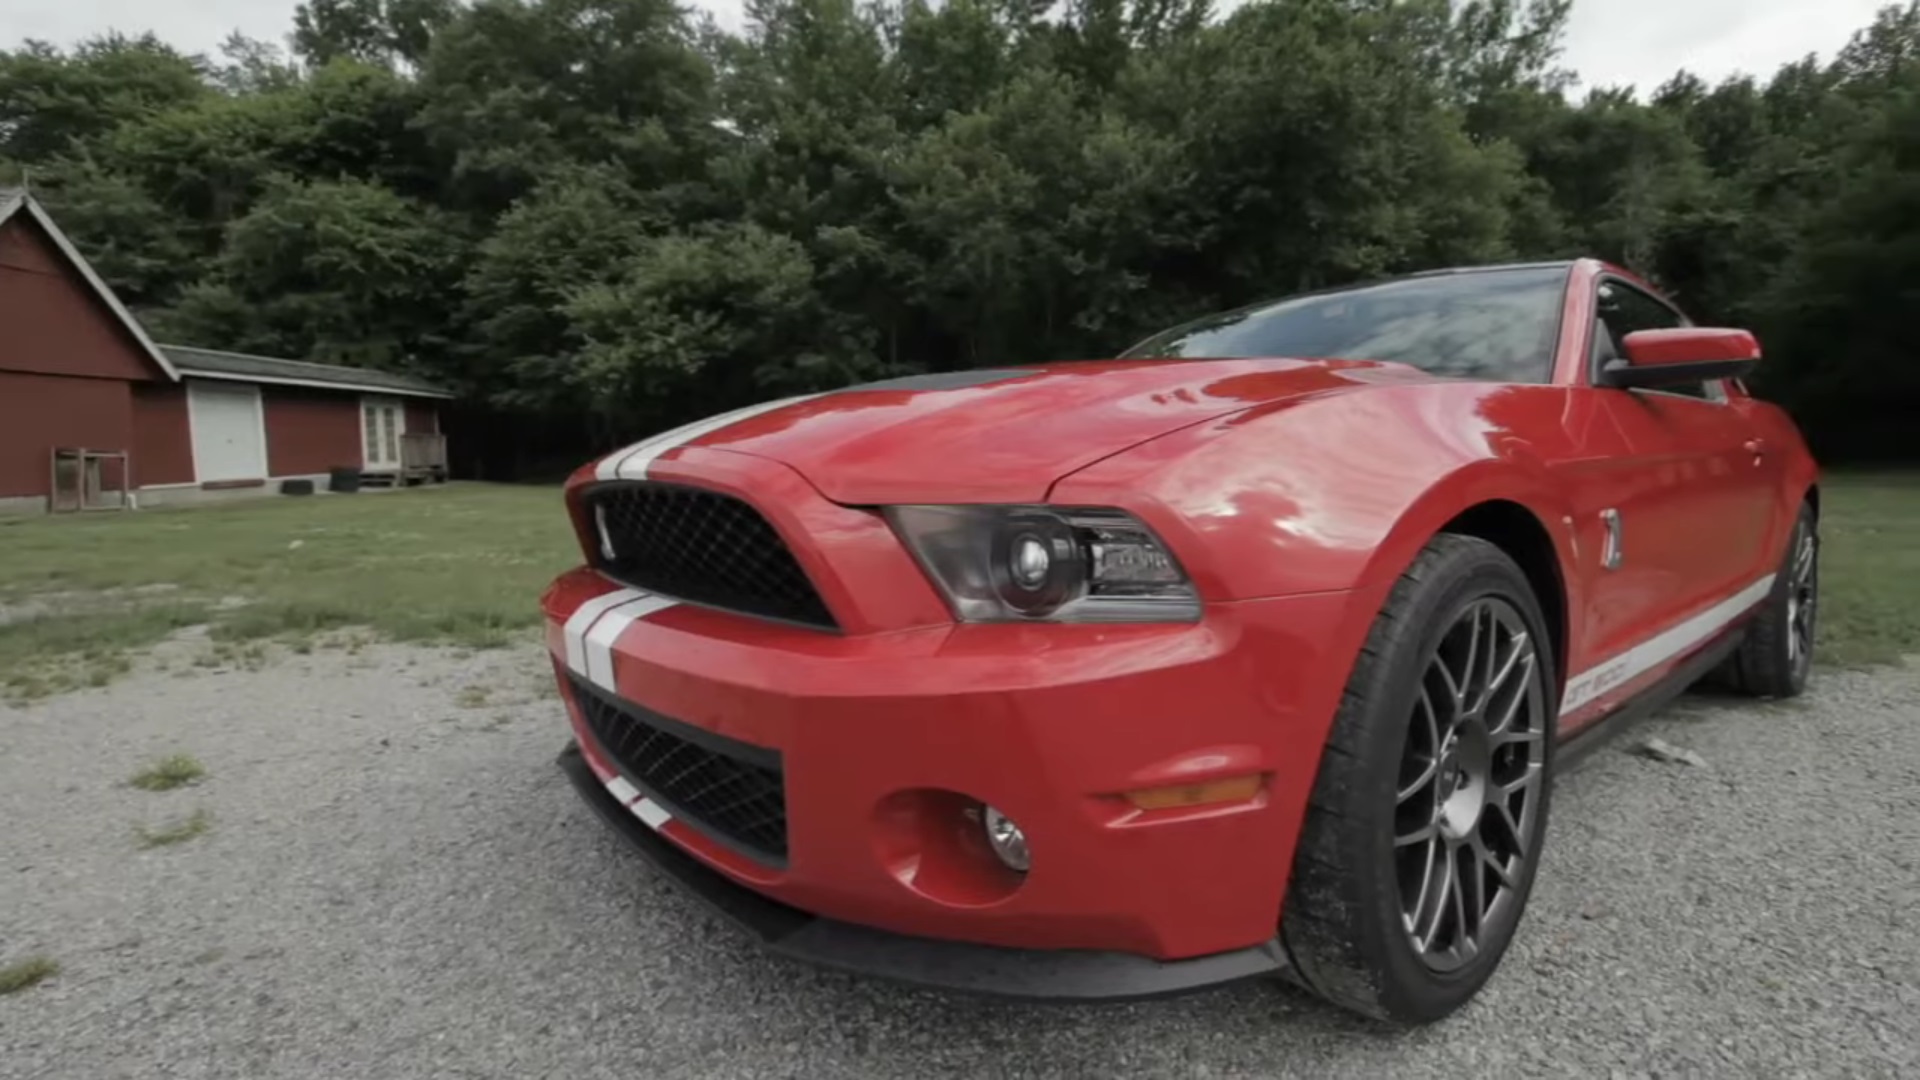 Video: Look Back To The World's Fastest Production Mustang - 2011 Ford Mustang Shelby GT500